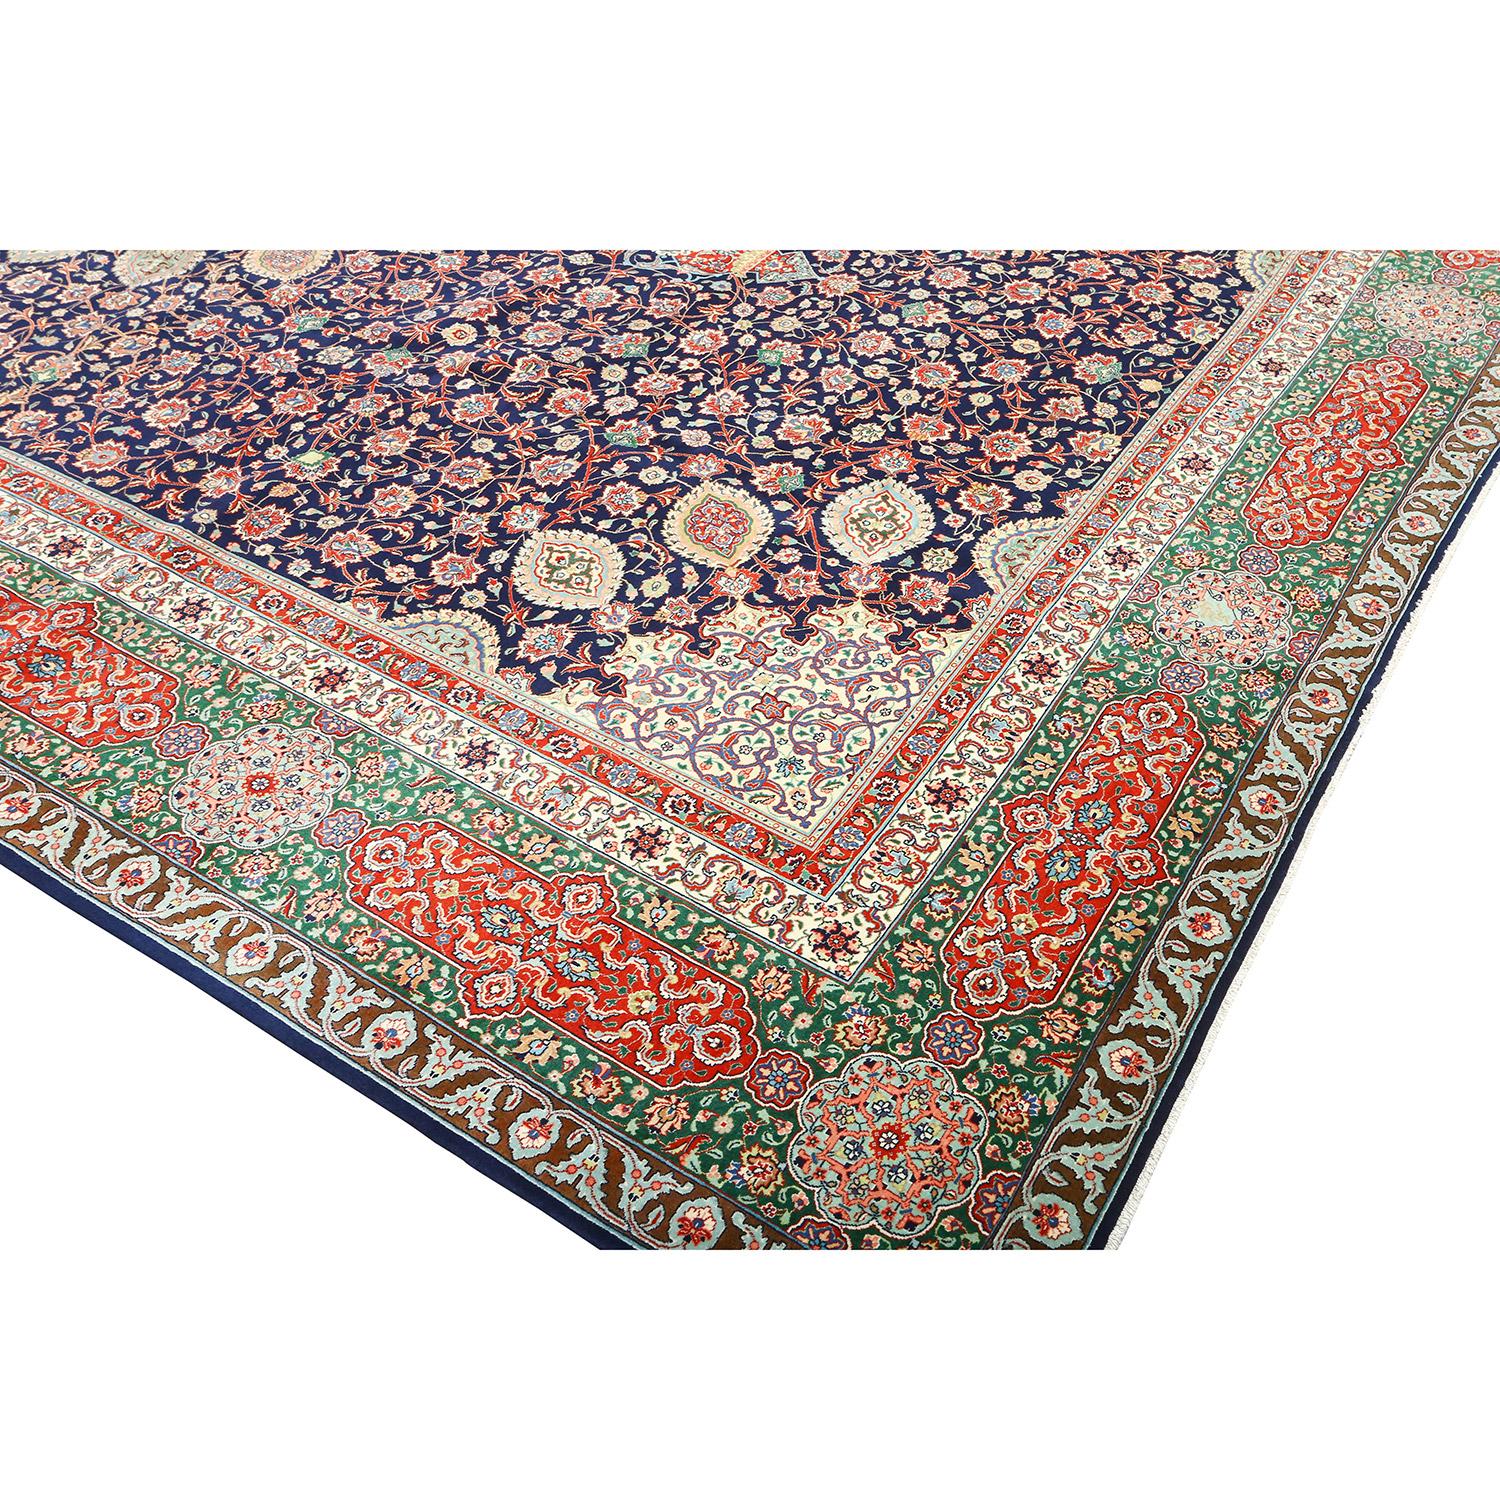 This vintage Tabriz Ardabil rug, proudly bearing the signature of Akbar Herizchi, is a rare and exceptional find. The Ardabil style is celebrated for its intricate design, and this rug is a shining example of that tradition, showcasing meticulous